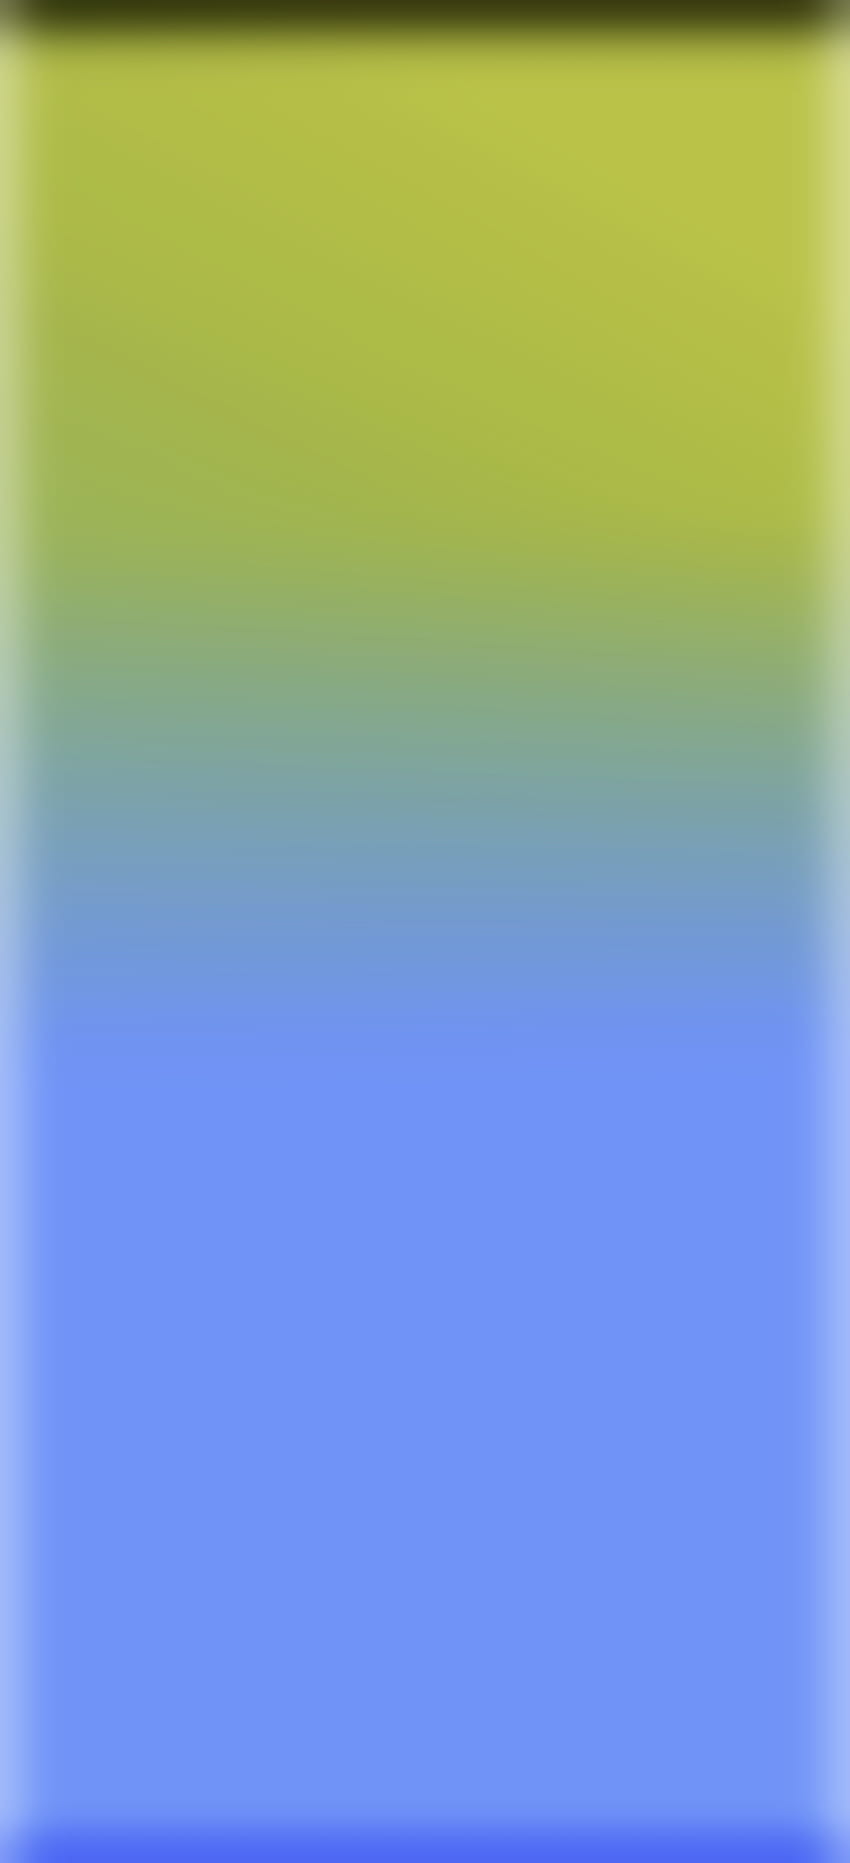 Original Gradient LG, iPhone, New, Samsung Galaxy, Cool, Color Art, Modern, Simple, Design, Lights, Colours, Vintage Style, Google, Pogo, Druffix, 2021, Classic, Magma, Android, Fantastic, Acer, iPhone13, Neo, Edge, Nokia HD phone wallpaper